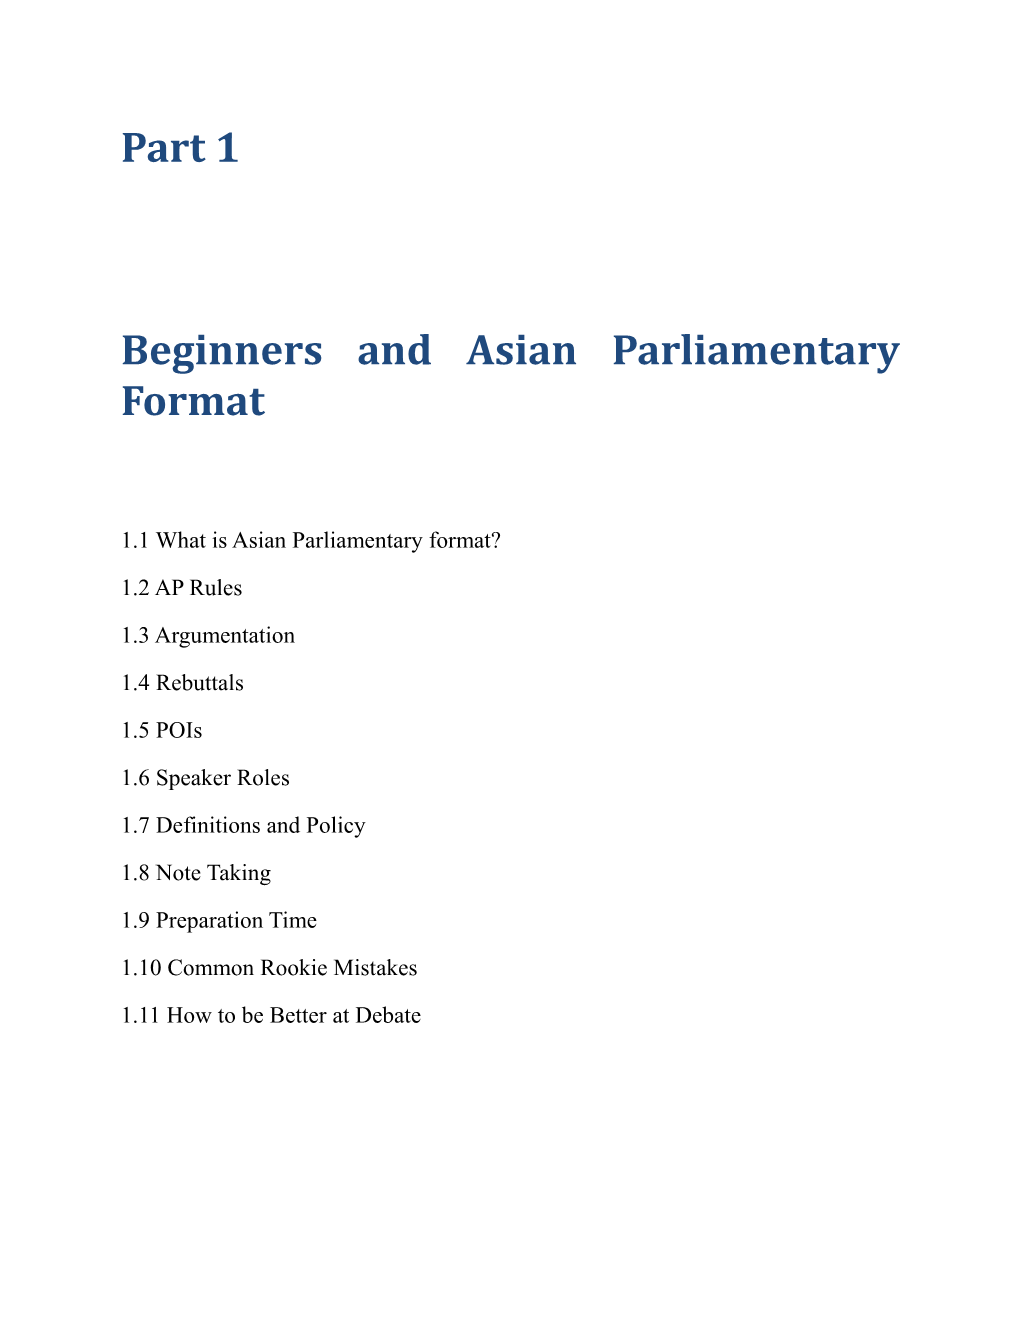 Beginners and Asian Parliamentary Format